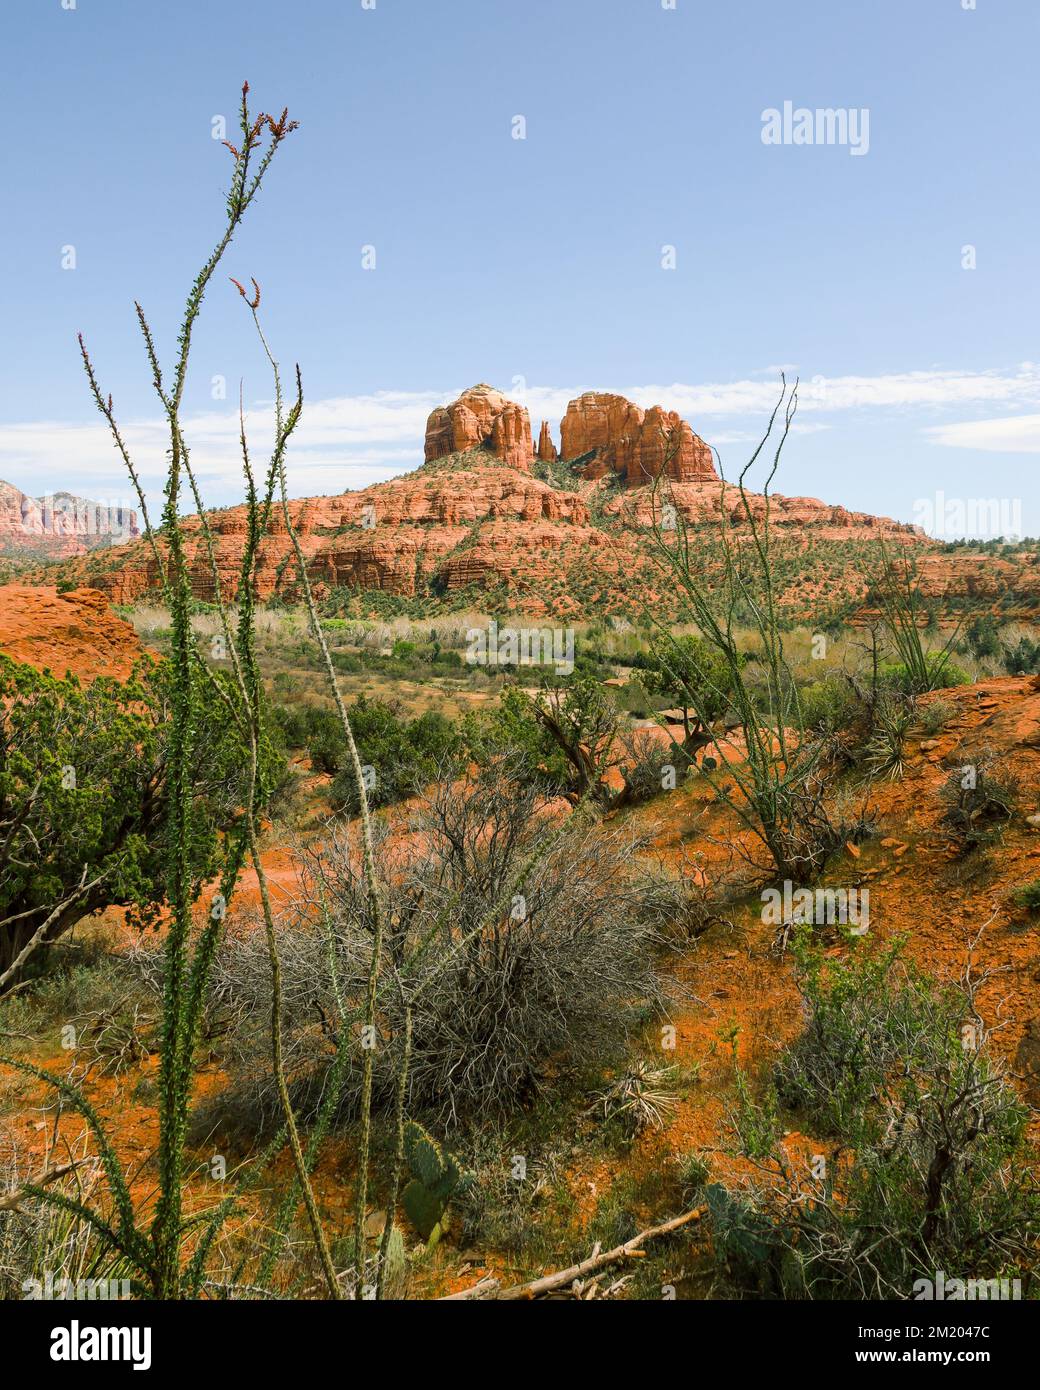 A view of Cathedral Rock in Sedona, AZ with two large rocks and a small spire in between, making the famous vortex site. Stock Photo